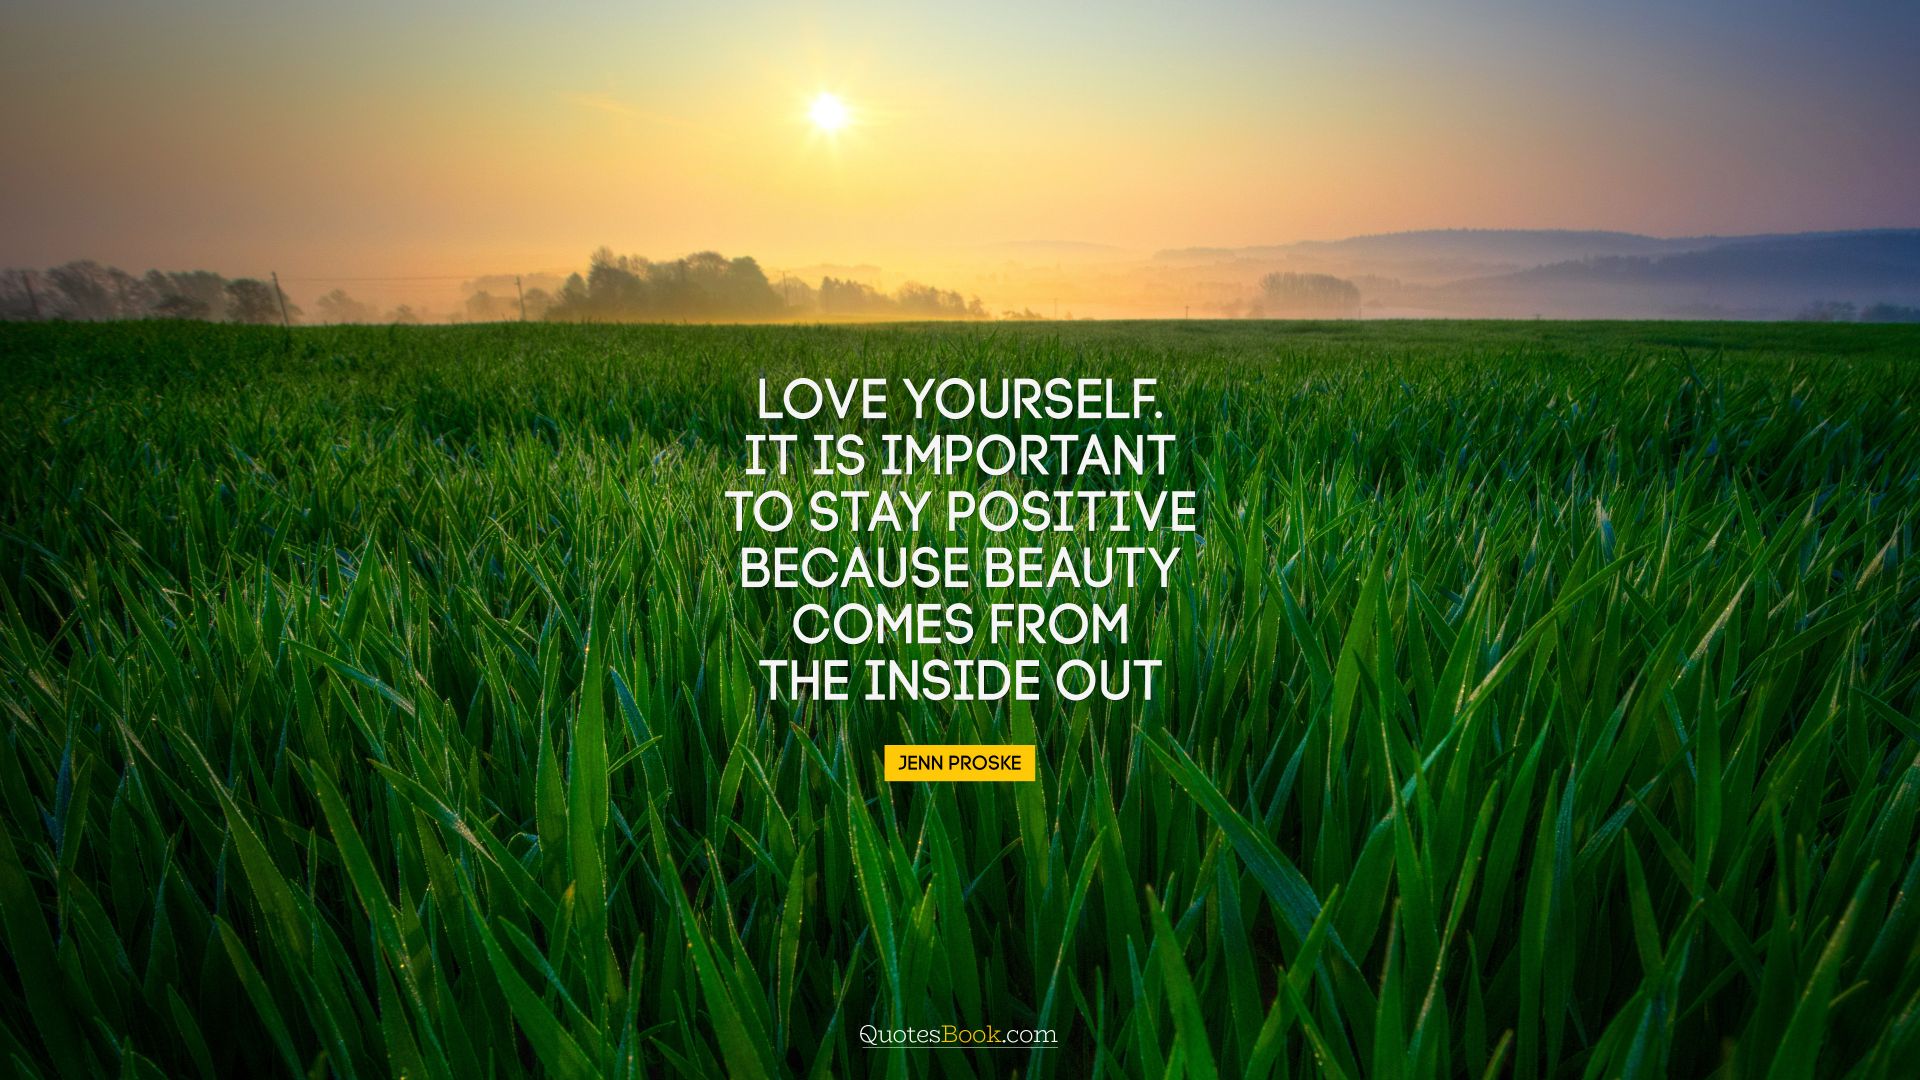 Love yourself. It is important to stay positive because beauty comes from the inside out. - Quote by Jenn Proske